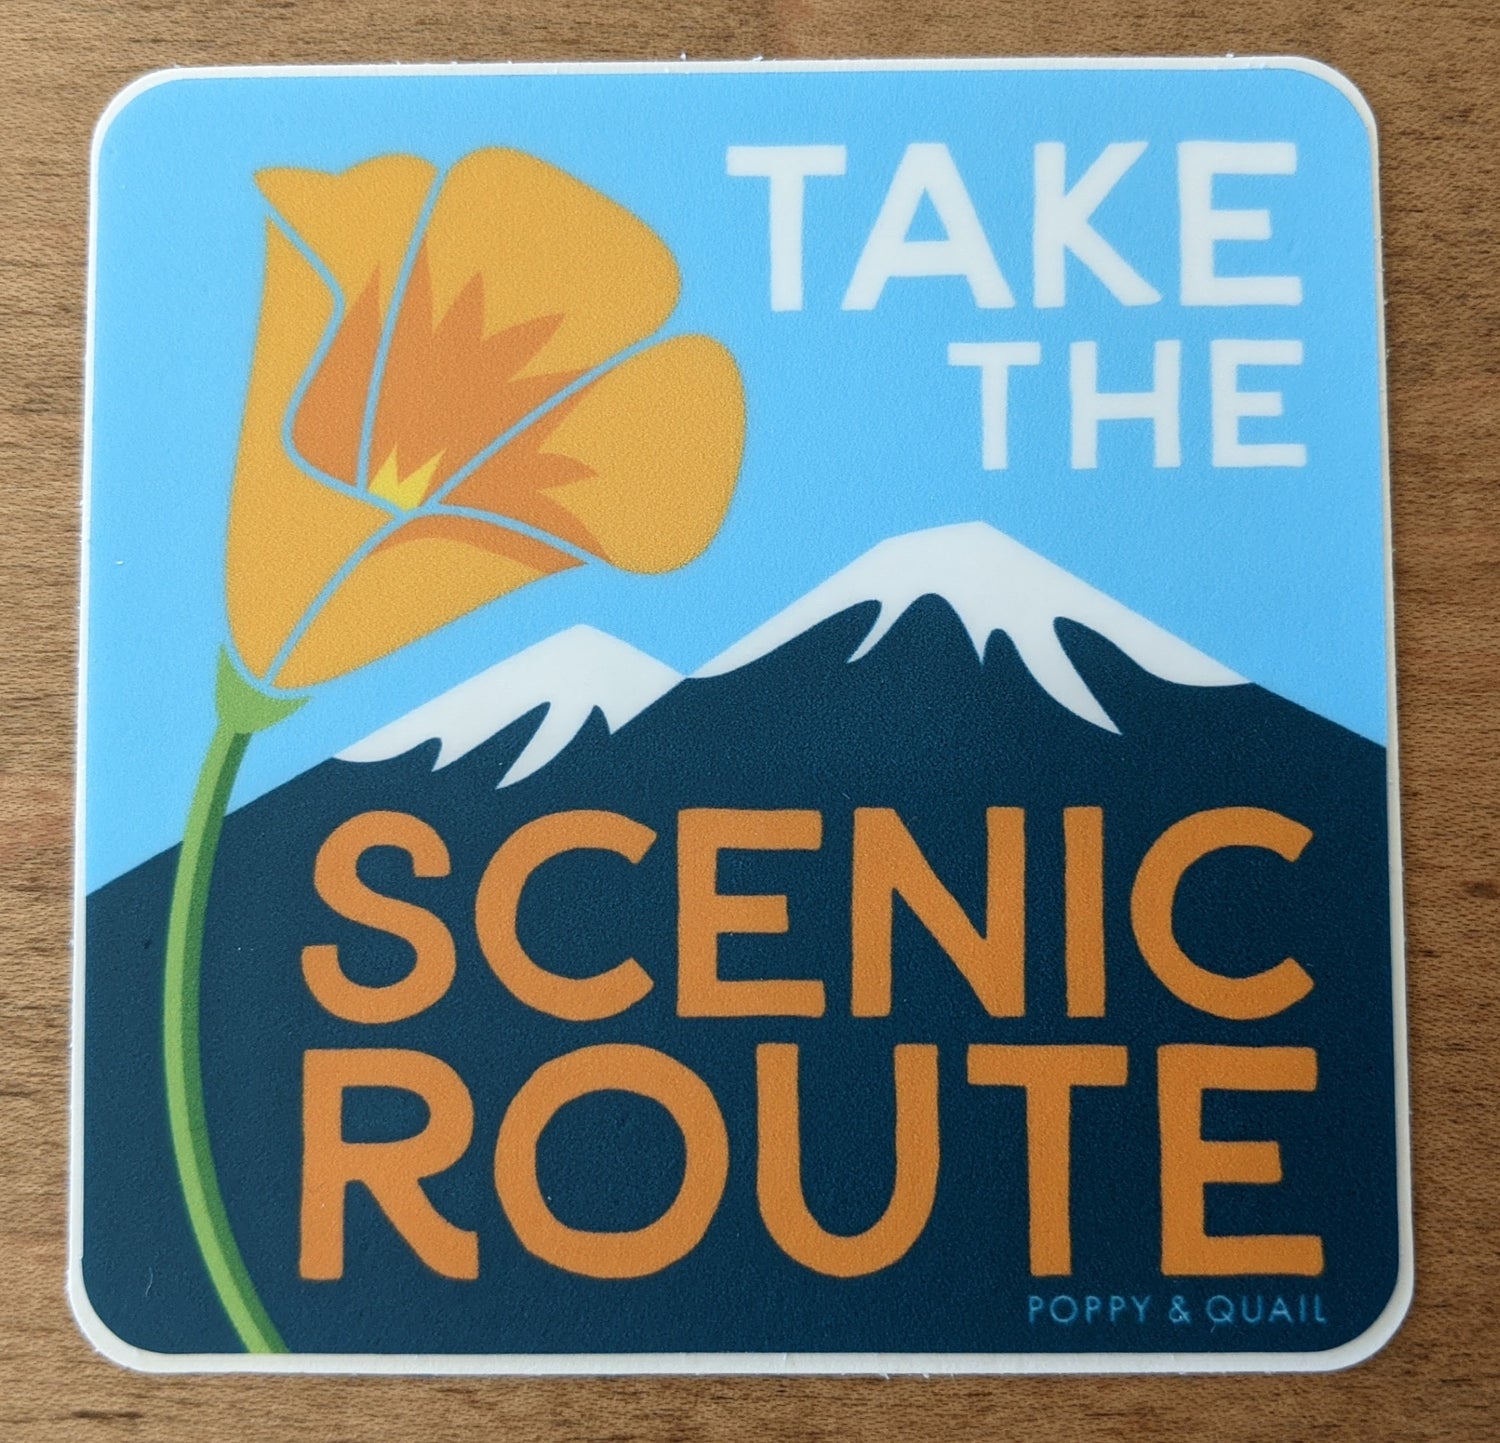 Square sticker with poppy and mountain reading "Take the Scenic Route" by Poppy & Quail